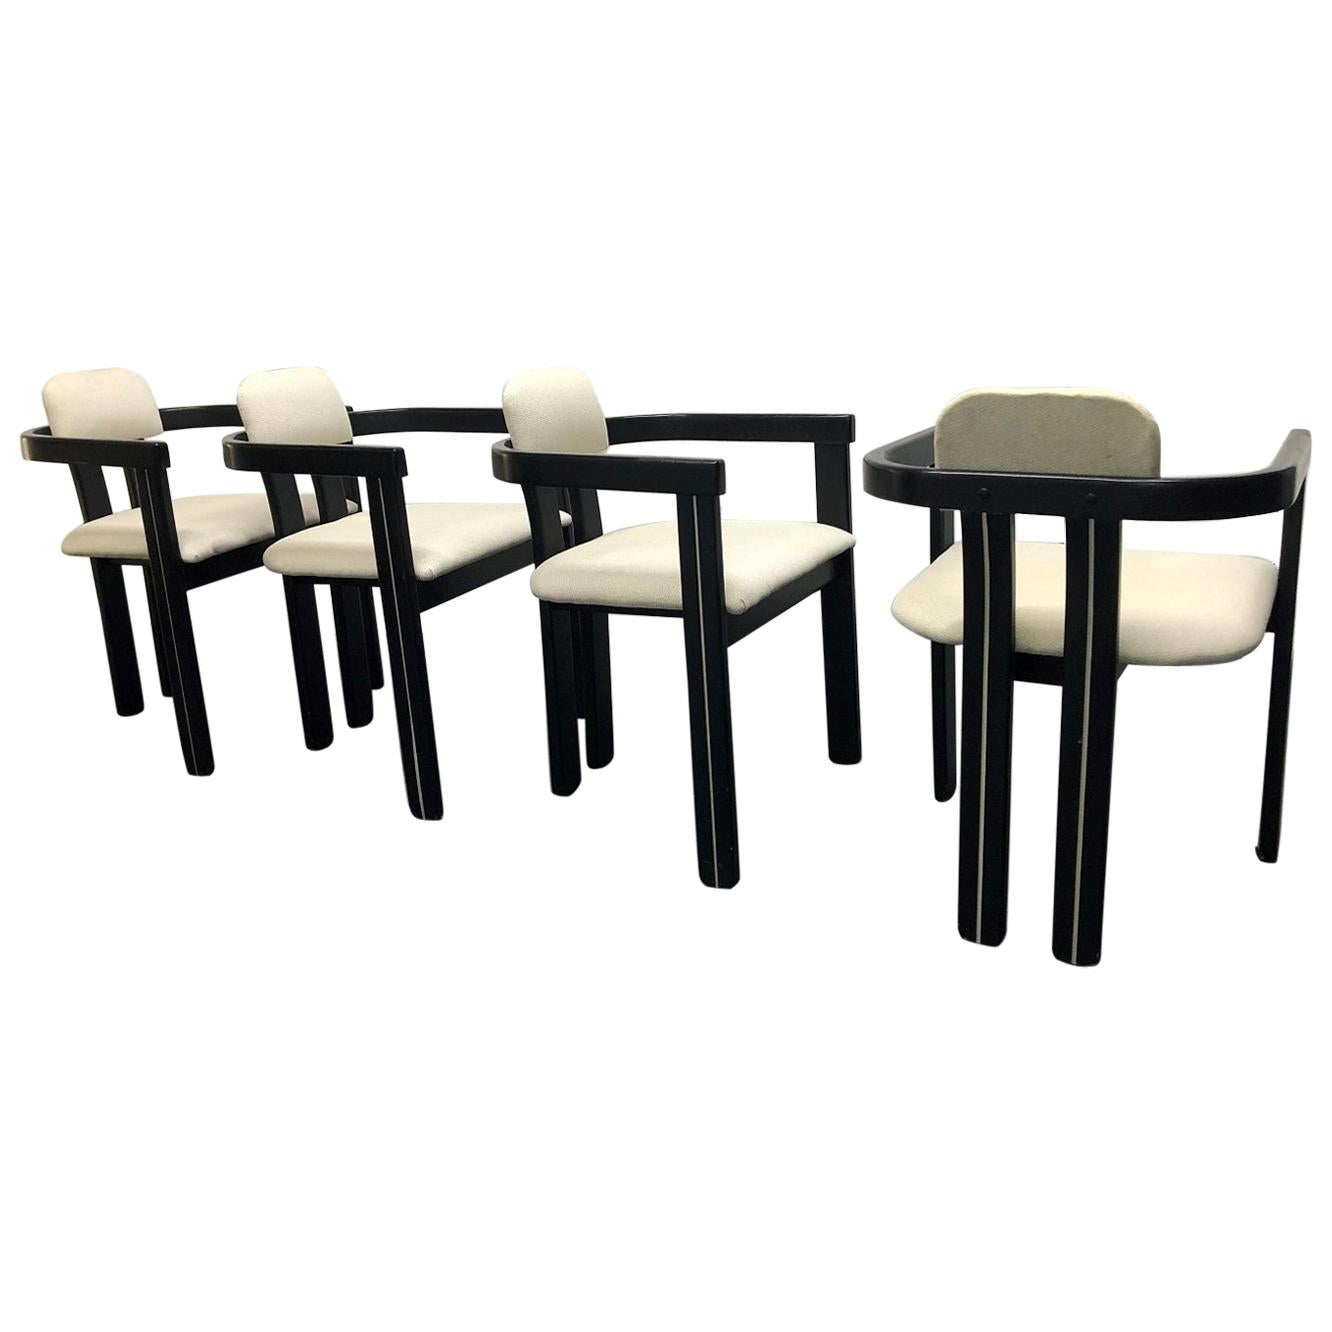 Set of Four Italian Sculptural Dining Chairs